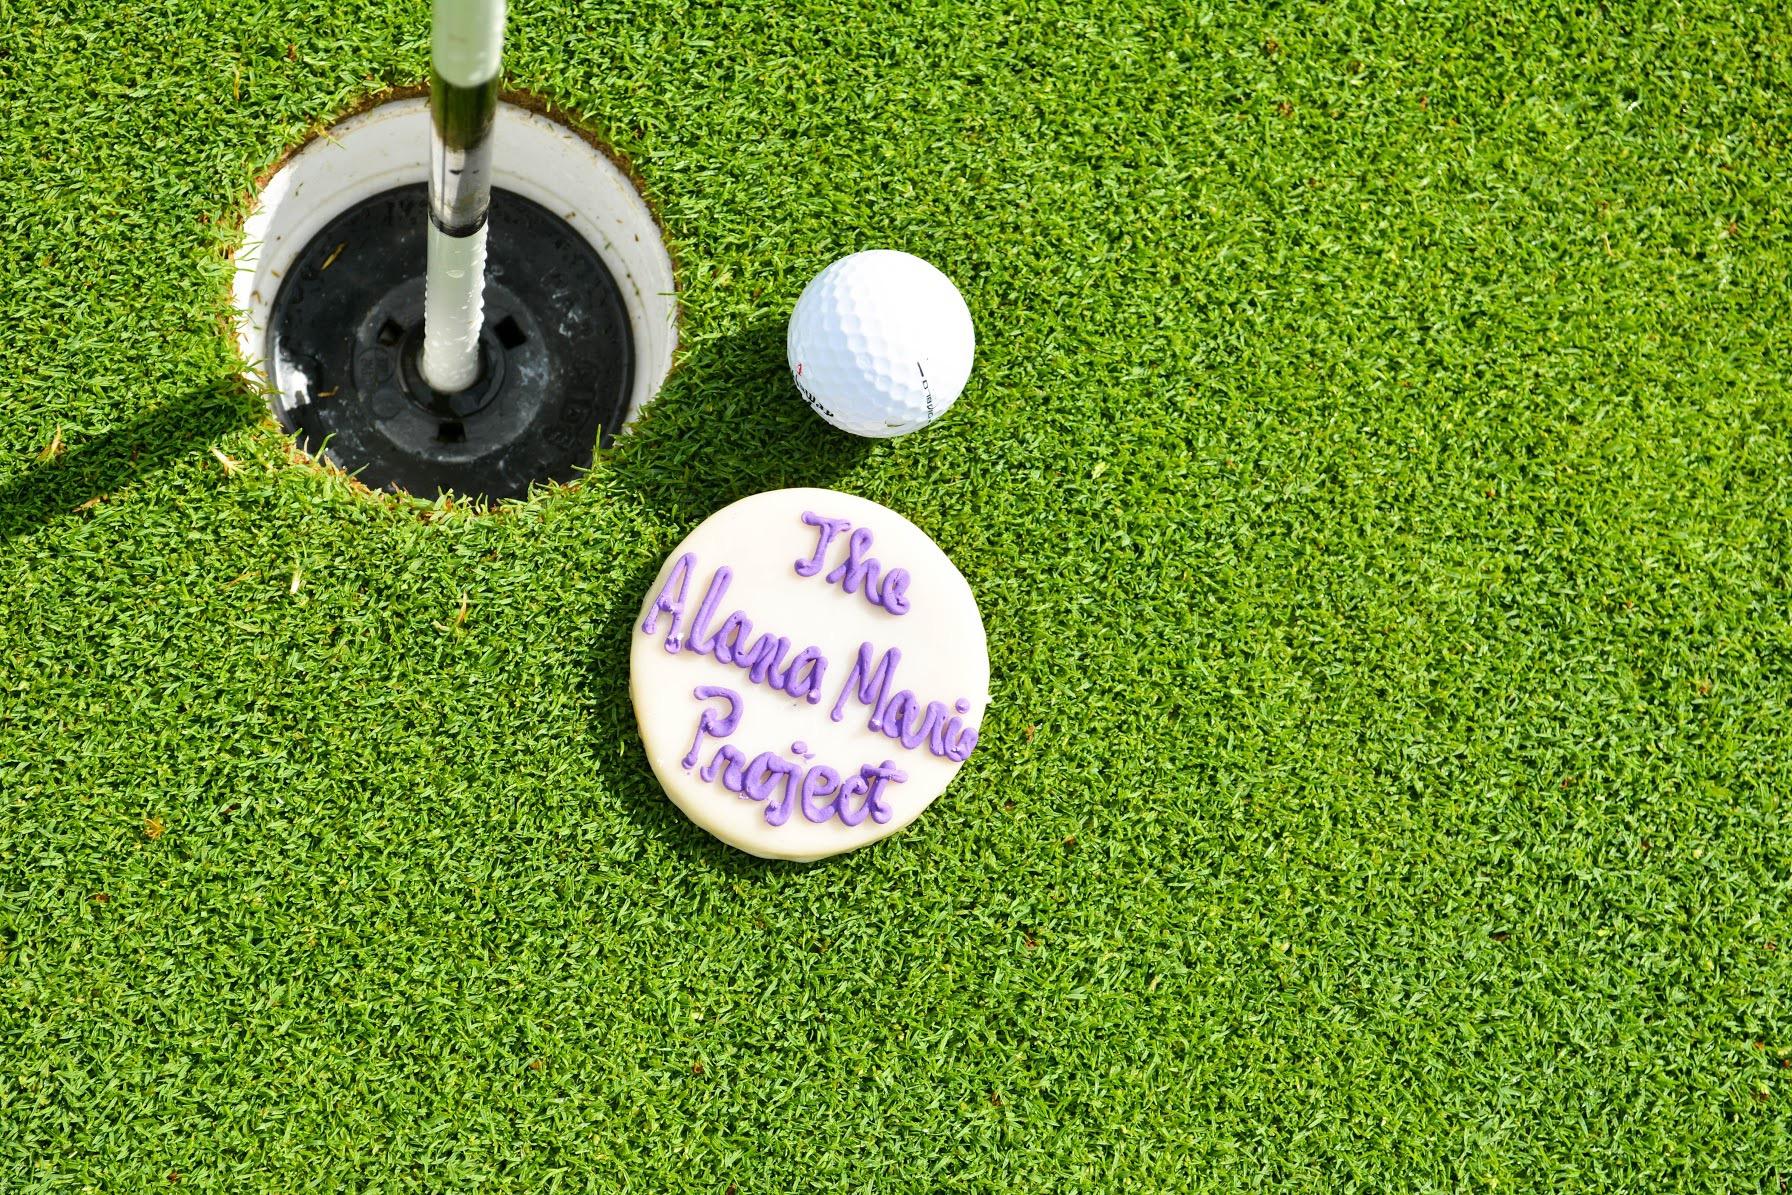 The Alana Marie Project's 3rd Annual Golf Tournament & Dinner